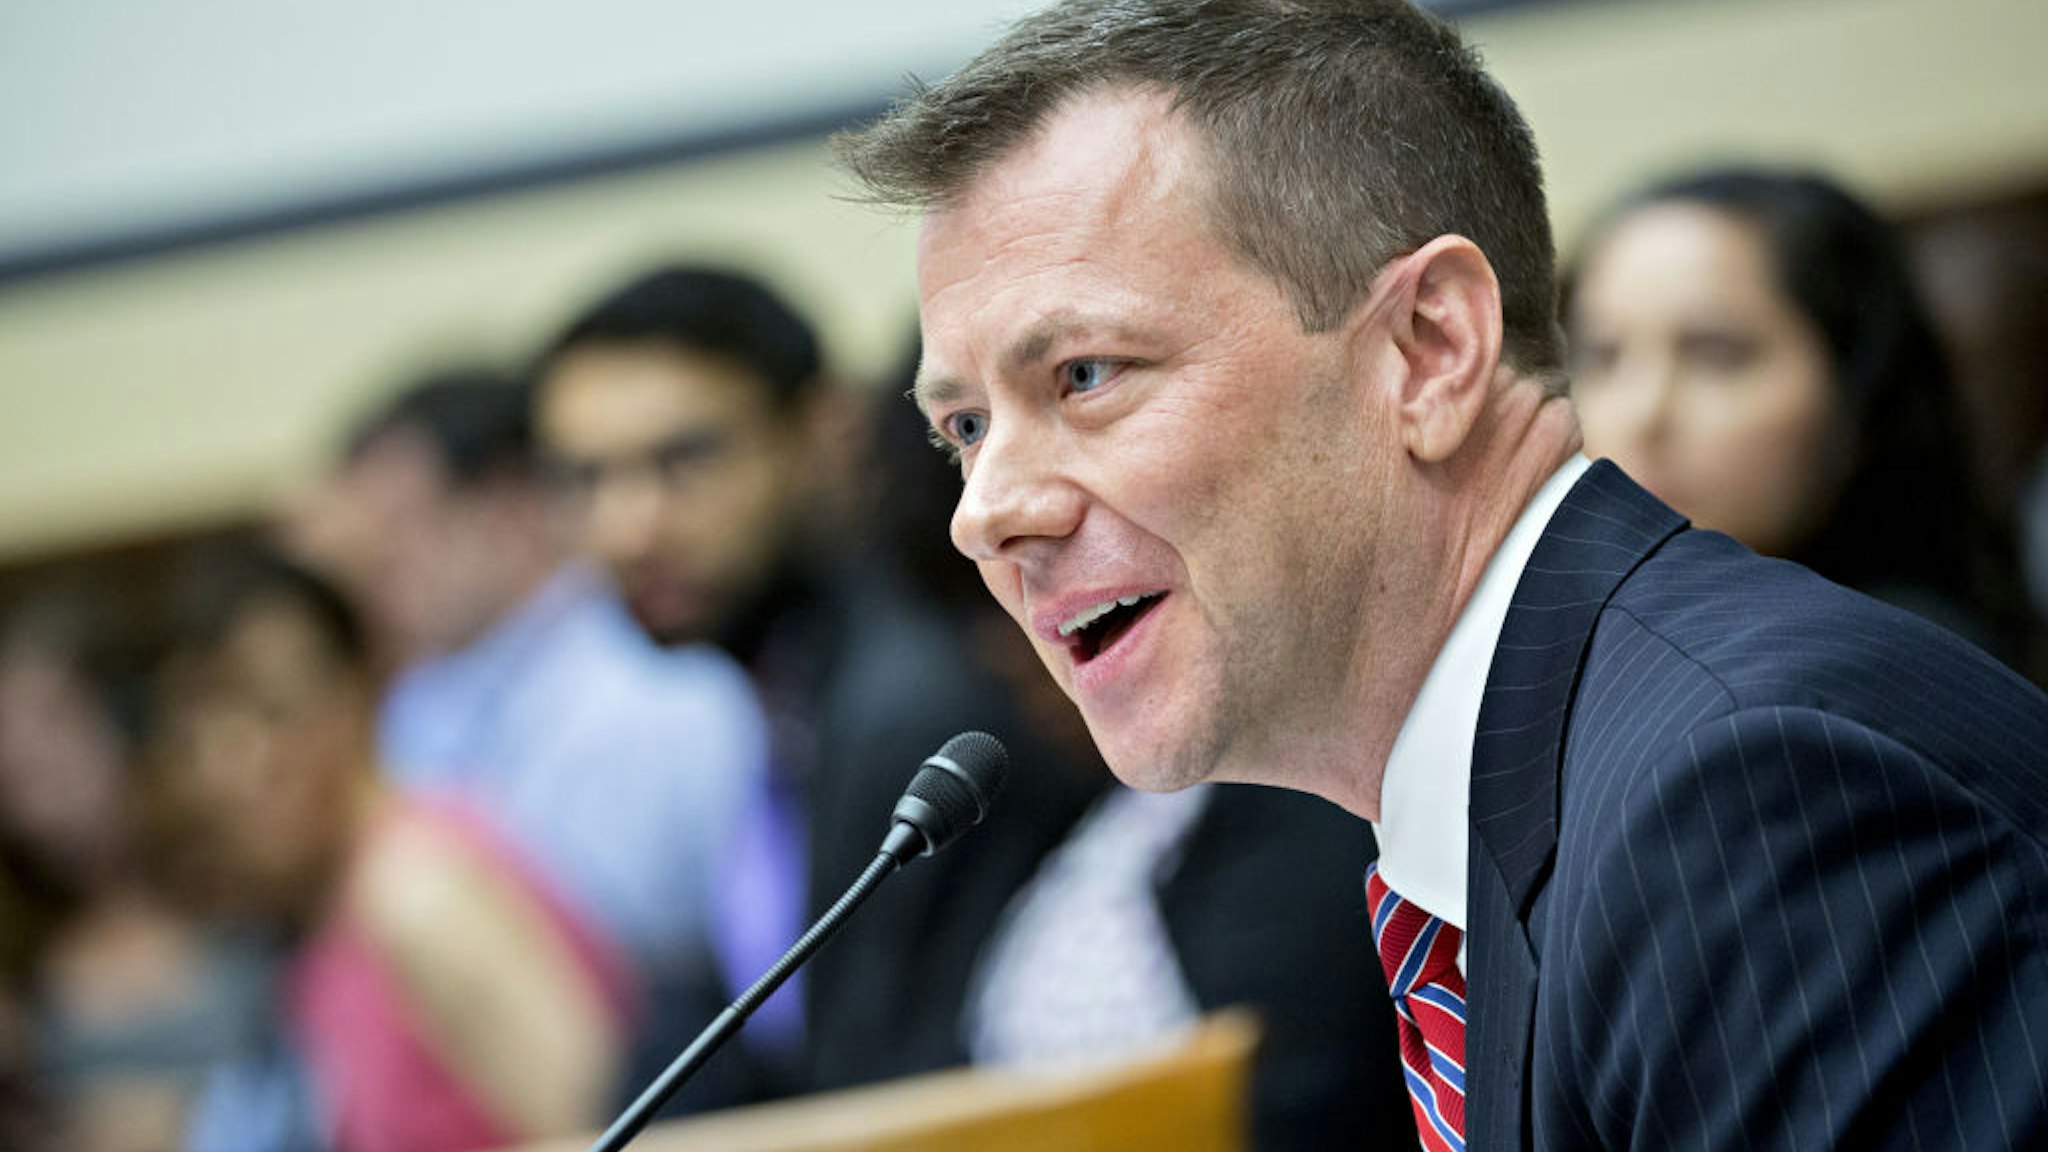 Peter Strzok, an agent at the Federal Bureau of Investigation (FBI), speaks during a joint House Judiciary, Oversight and Government Reform Committees hearing in Washington, D.C., U.S., on Thursday, July 12, 2018.